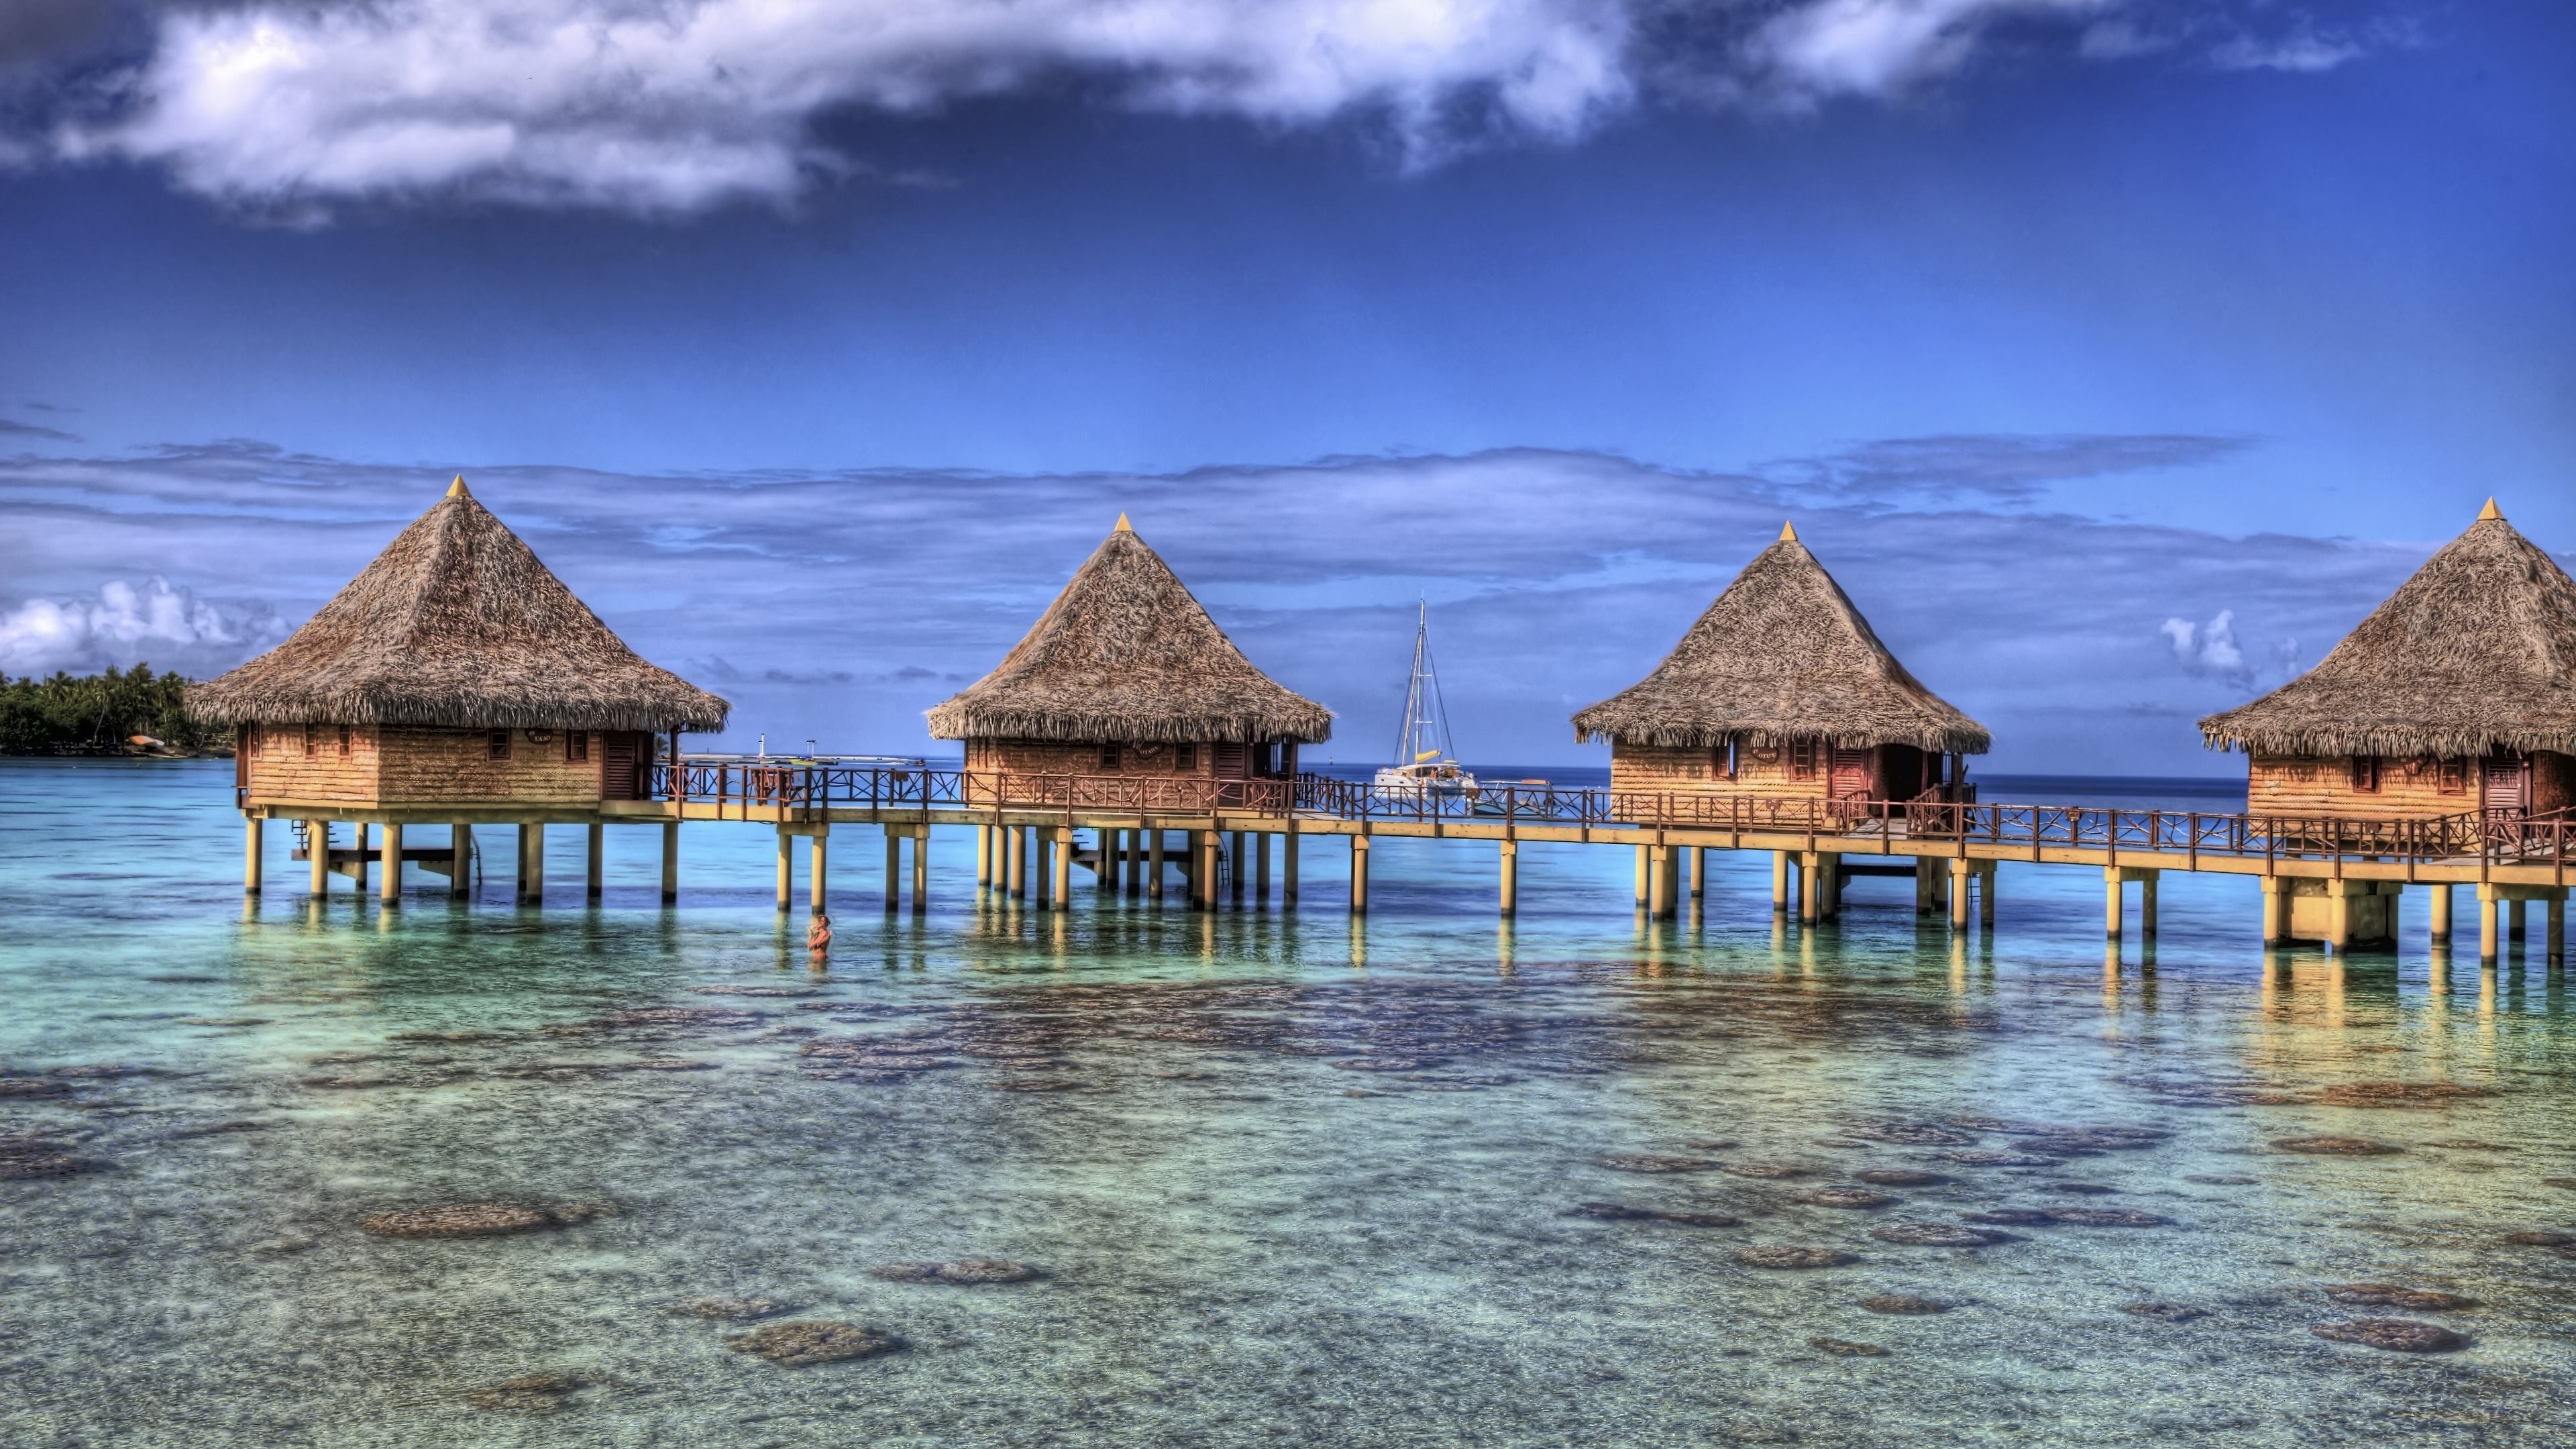 Bungalow: Beach houses in Micronesia, Travel yachts, Recreational activity at the coast of the ocean. 3840x2160 4K Wallpaper.